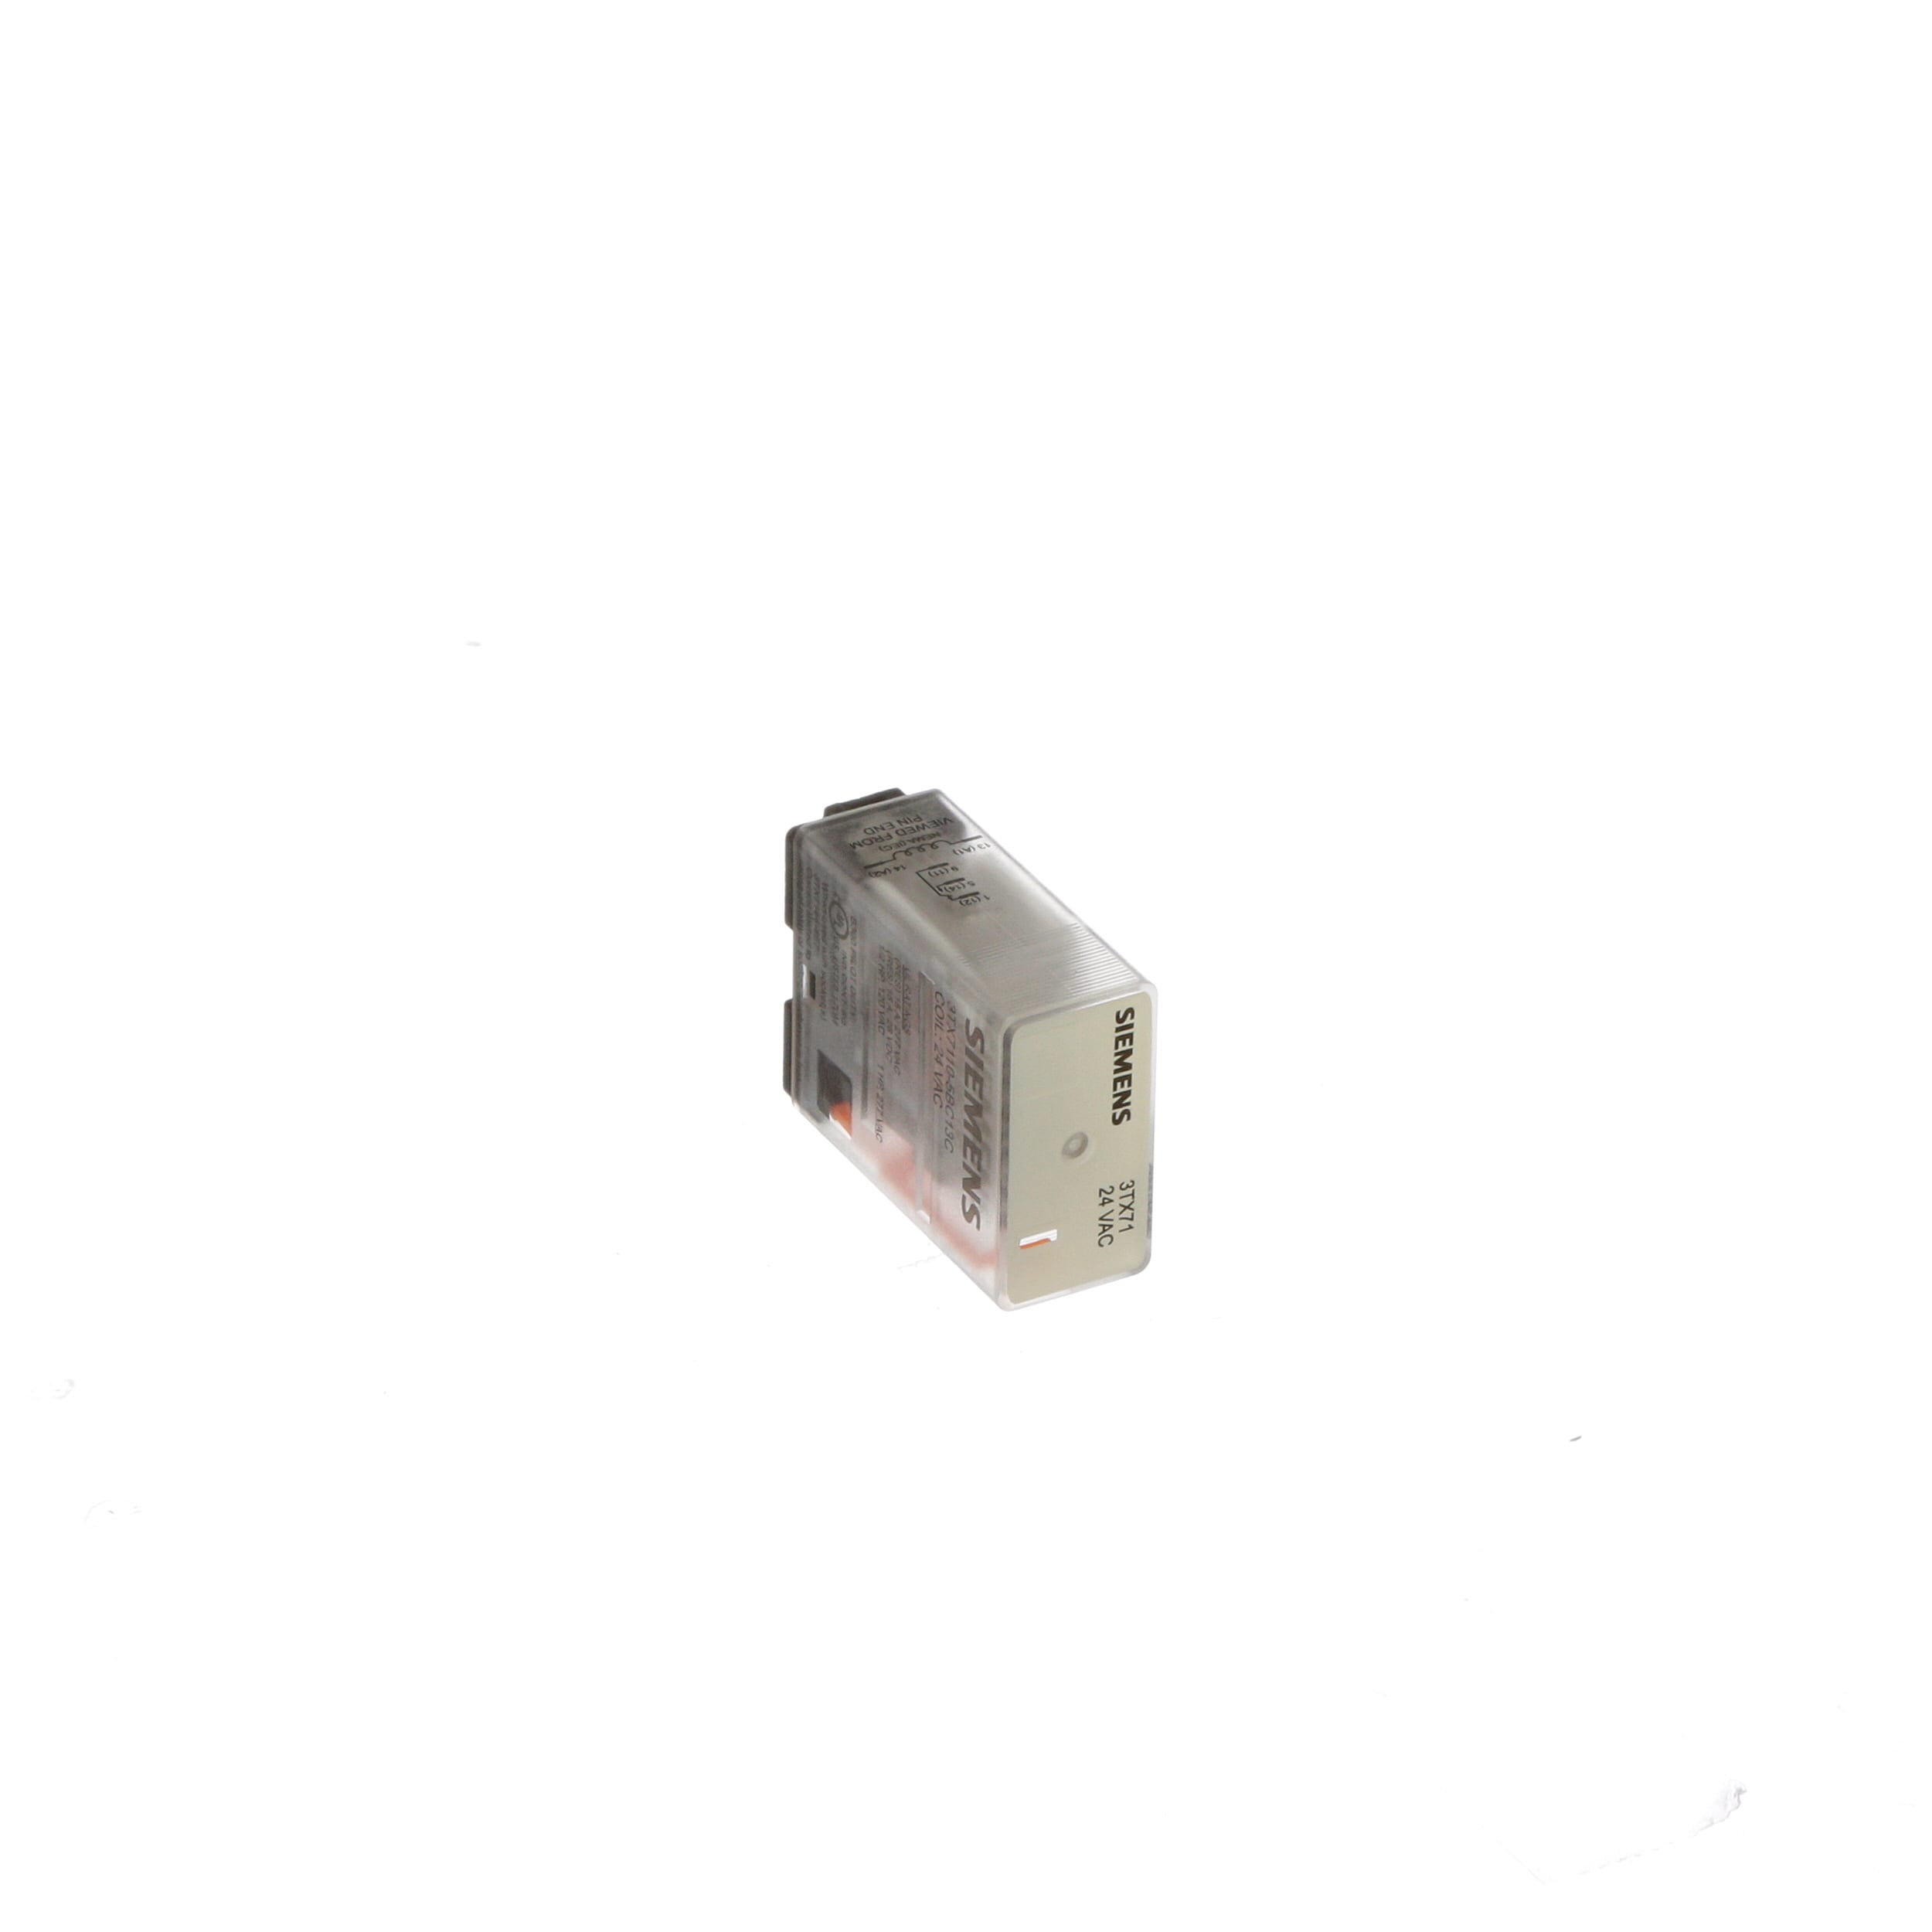 20A Contact Rating Mechanical Flag SPDT Contacts Square Base Siemens 3TX7109-5BG13C Basic Plug In Relay Narrow 230VAC Coil Voltage 3TX71095BG13C 